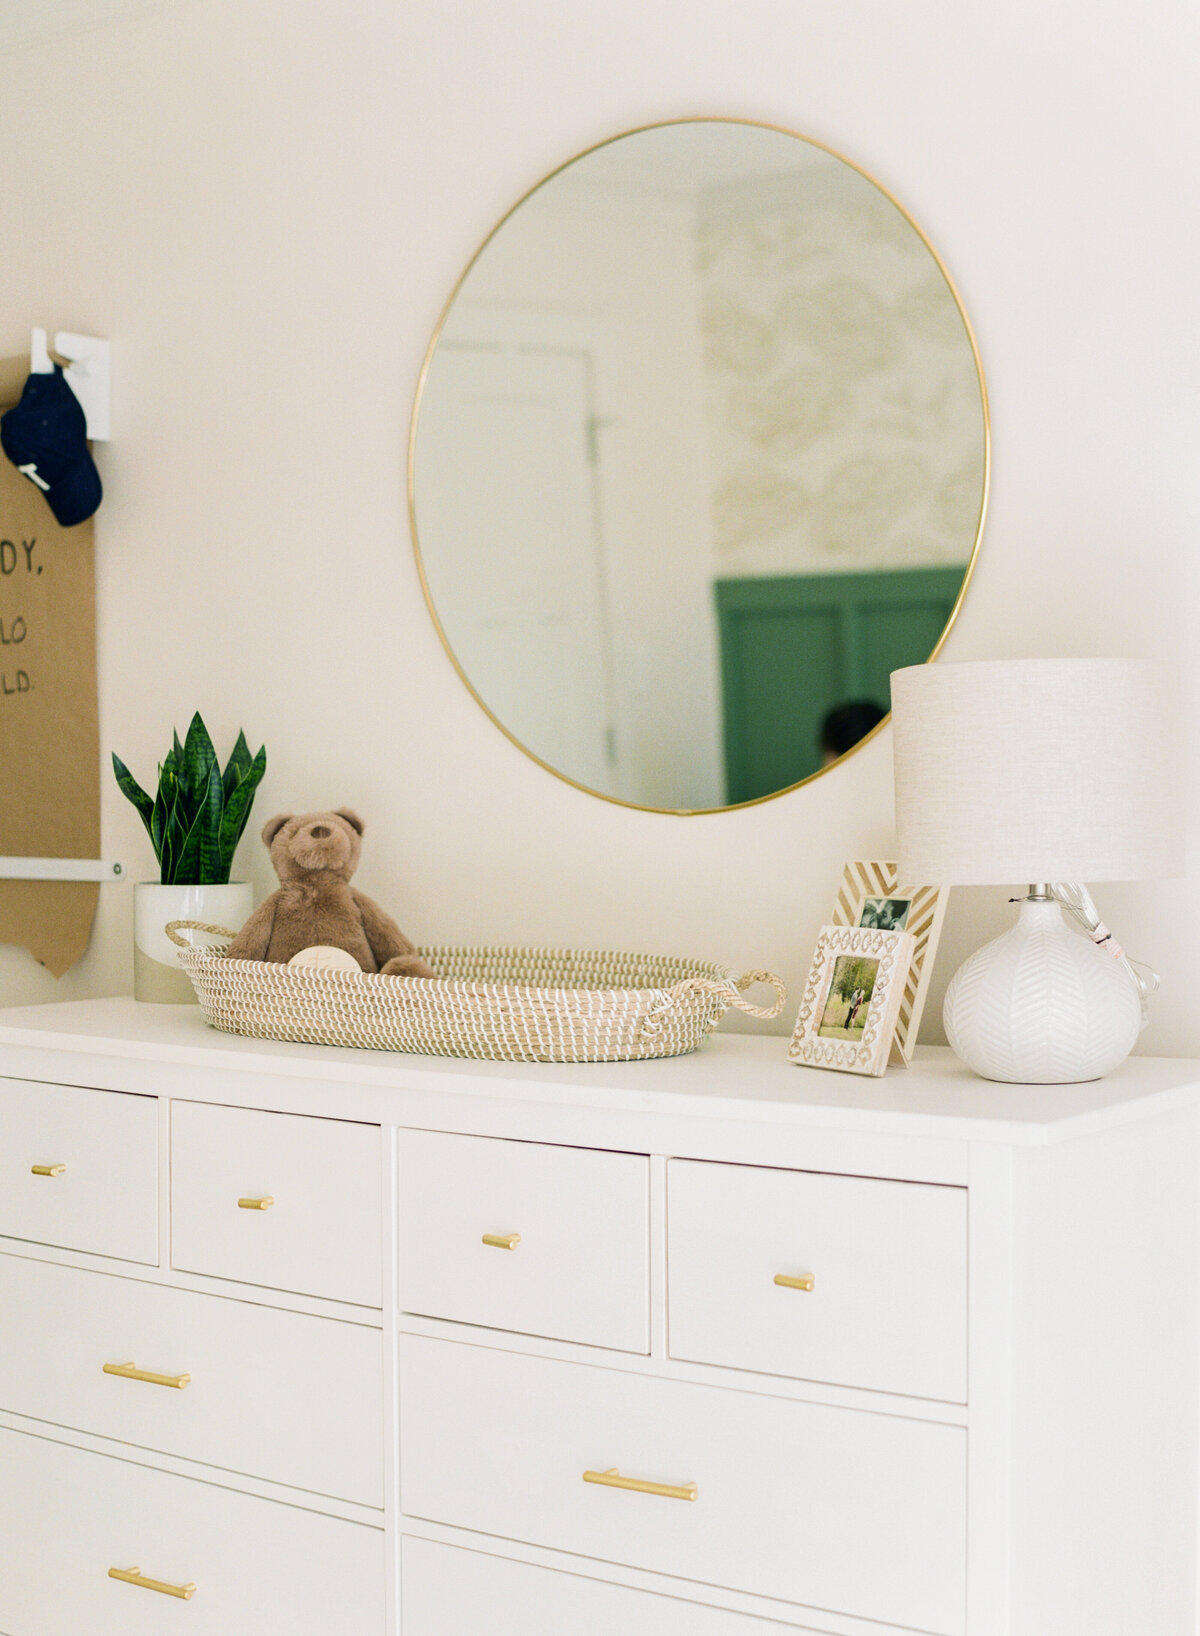 Neutral changing table with round gold mirror during Raleigh NC newborn session. Photo by Raleigh Newborn Photography A.J. Dunlap Photography.